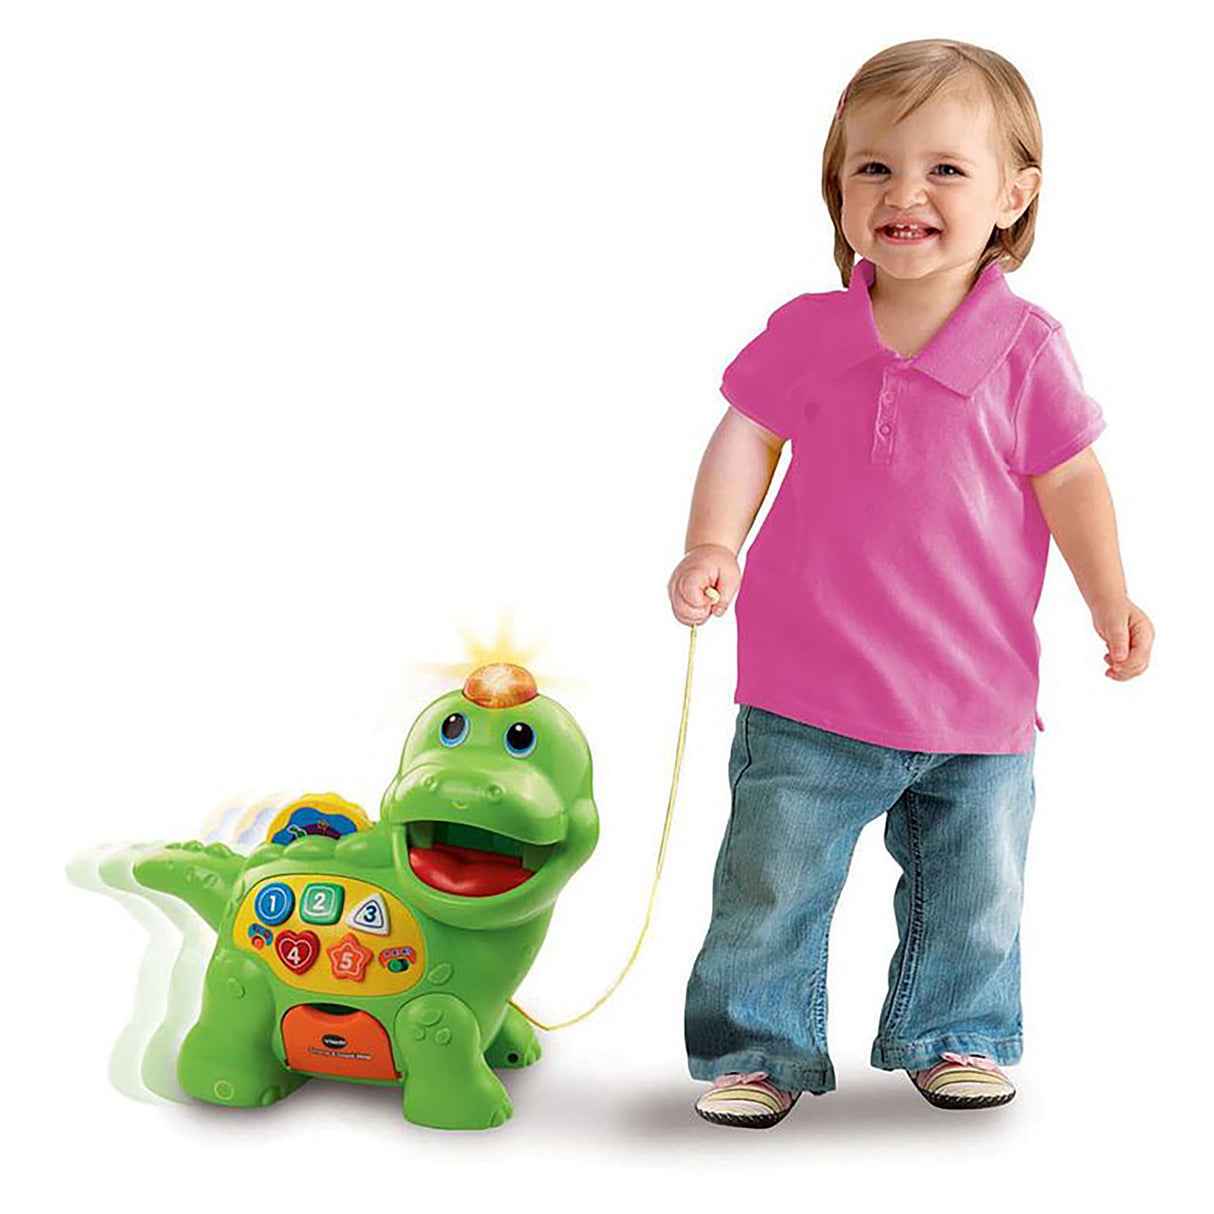 VTech Feed Me Dino (18-48 months)